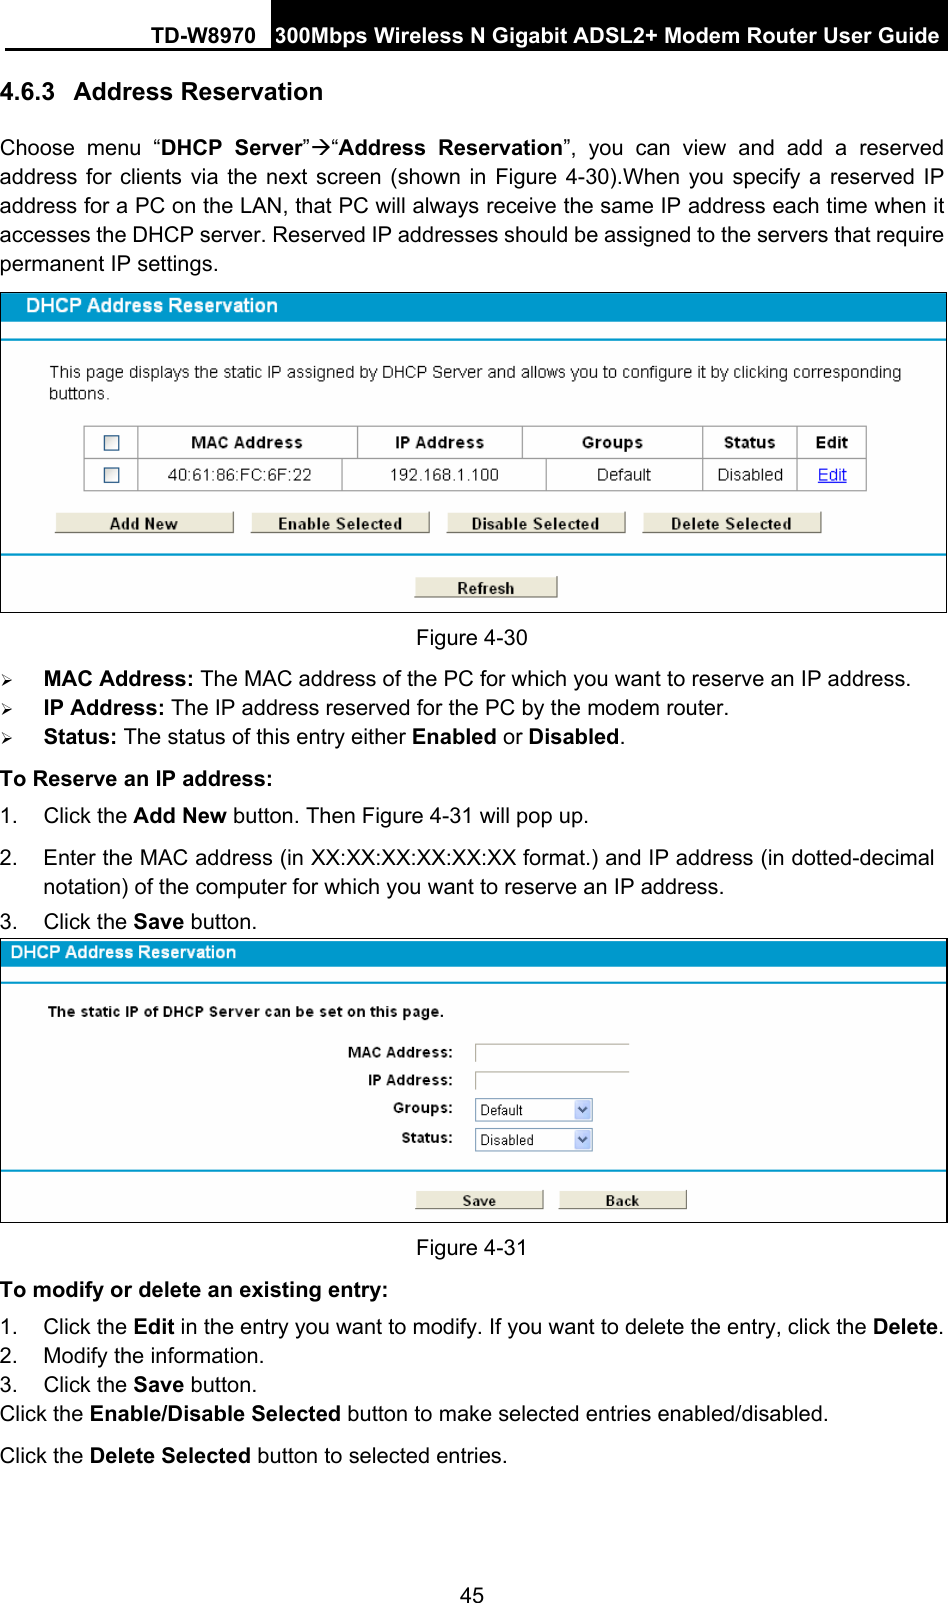 TD-W8970 300Mbps Wireless N Gigabit ADSL2+ Modem Router User Guide 45 4.6.3  Address Reservation Choose menu “DHCP Server”Æ“Address Reservation”, you can view and add a reserved address for clients via the next screen (shown in Figure 4-30).When you specify a reserved IP address for a PC on the LAN, that PC will always receive the same IP address each time when it accesses the DHCP server. Reserved IP addresses should be assigned to the servers that require permanent IP settings.    Figure 4-30   ¾ MAC Address: The MAC address of the PC for which you want to reserve an IP address. ¾ IP Address: The IP address reserved for the PC by the modem router. ¾ Status: The status of this entry either Enabled or Disabled. To Reserve an IP address:  1. Click the Add New button. Then Figure 4-31 will pop up. 2.  Enter the MAC address (in XX:XX:XX:XX:XX:XX format.) and IP address (in dotted-decimal notation) of the computer for which you want to reserve an IP address.   3. Click the Save button.    Figure 4-31   To modify or delete an existing entry: 1. Click the Edit in the entry you want to modify. If you want to delete the entry, click the Delete. 2.  Modify the information.   3. Click the Save button. Click the Enable/Disable Selected button to make selected entries enabled/disabled. Click the Delete Selected button to selected entries. 